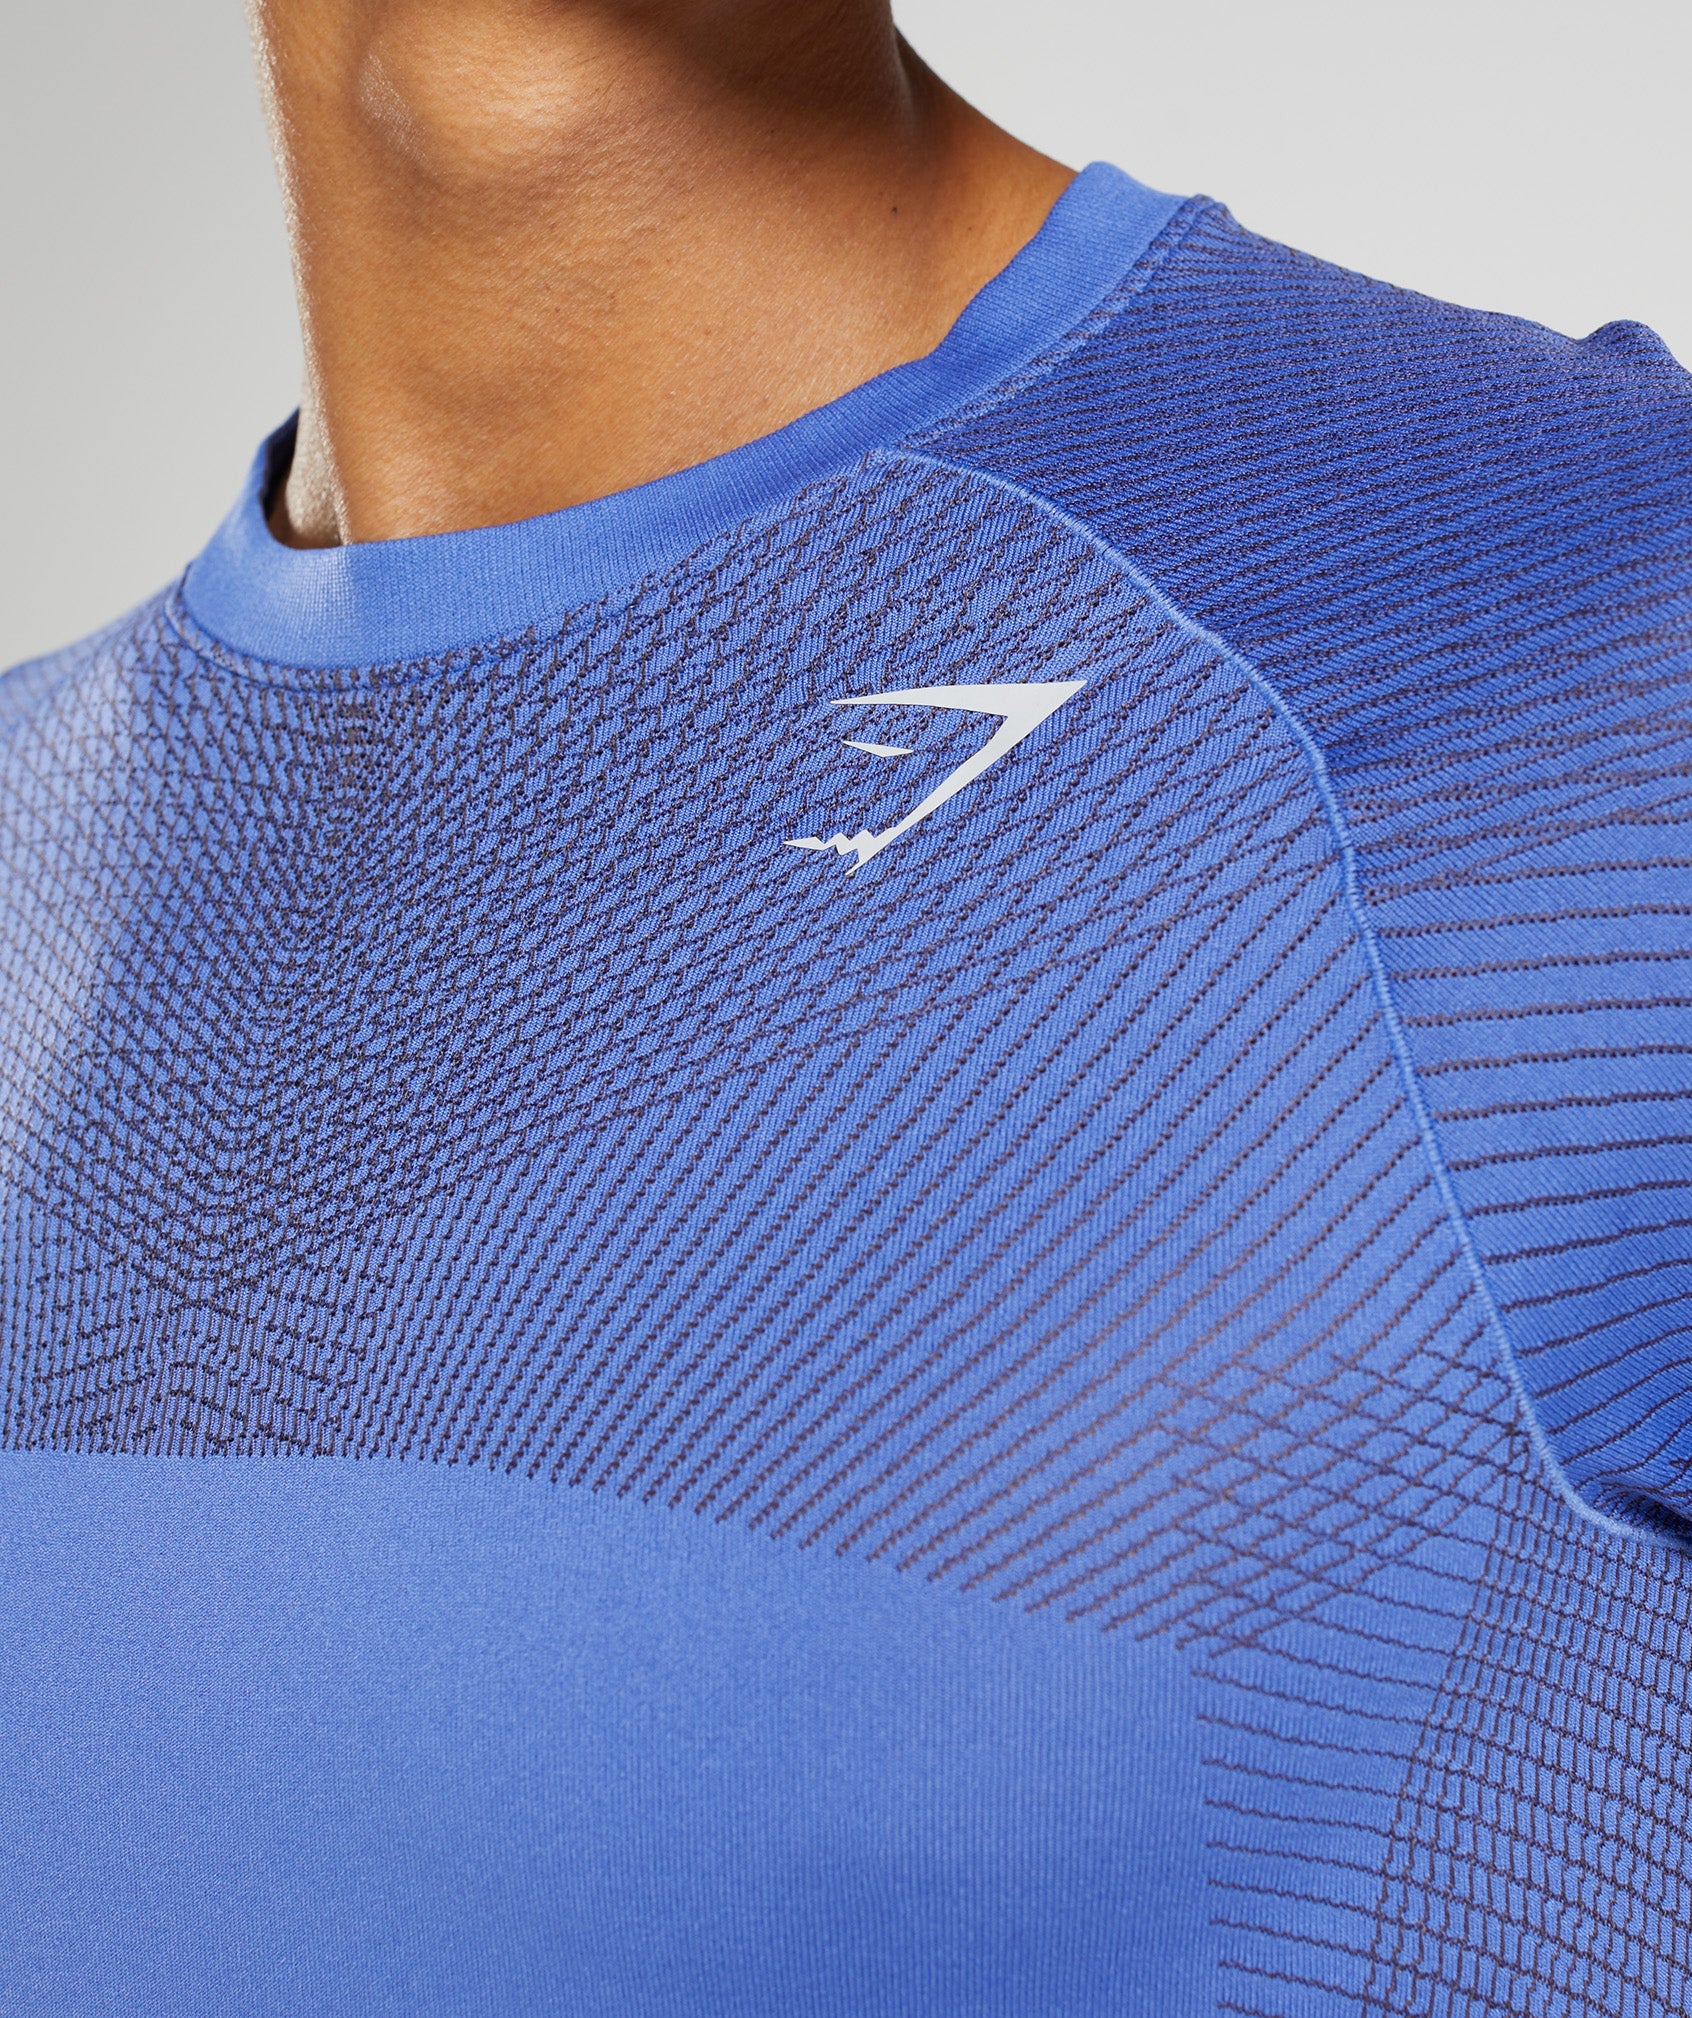 Apex Seamless T-Shirt in Court Blue/Onyx Grey - view 6